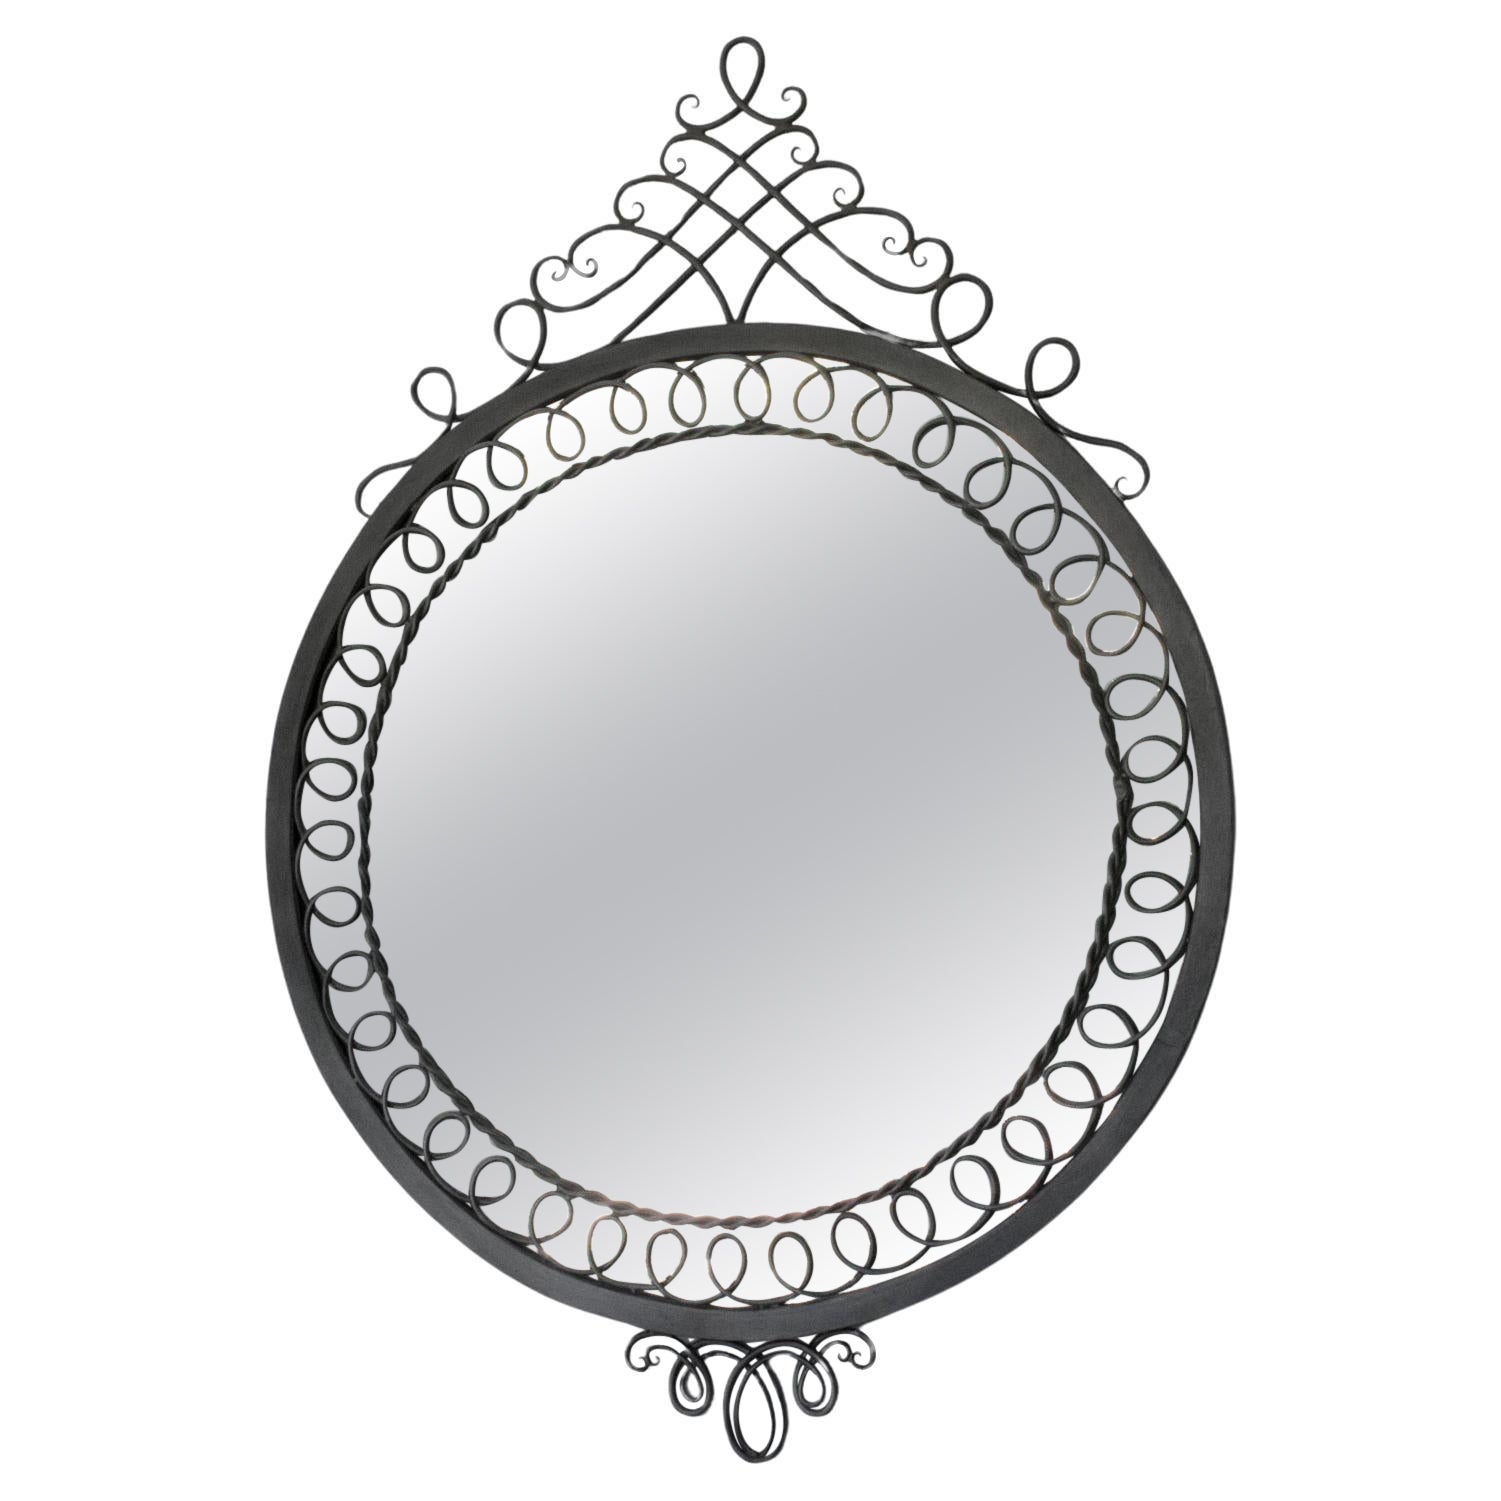 Mid-Century Cast Iron Ornate Wall-Mounted Mirror, France 1950s For Sale